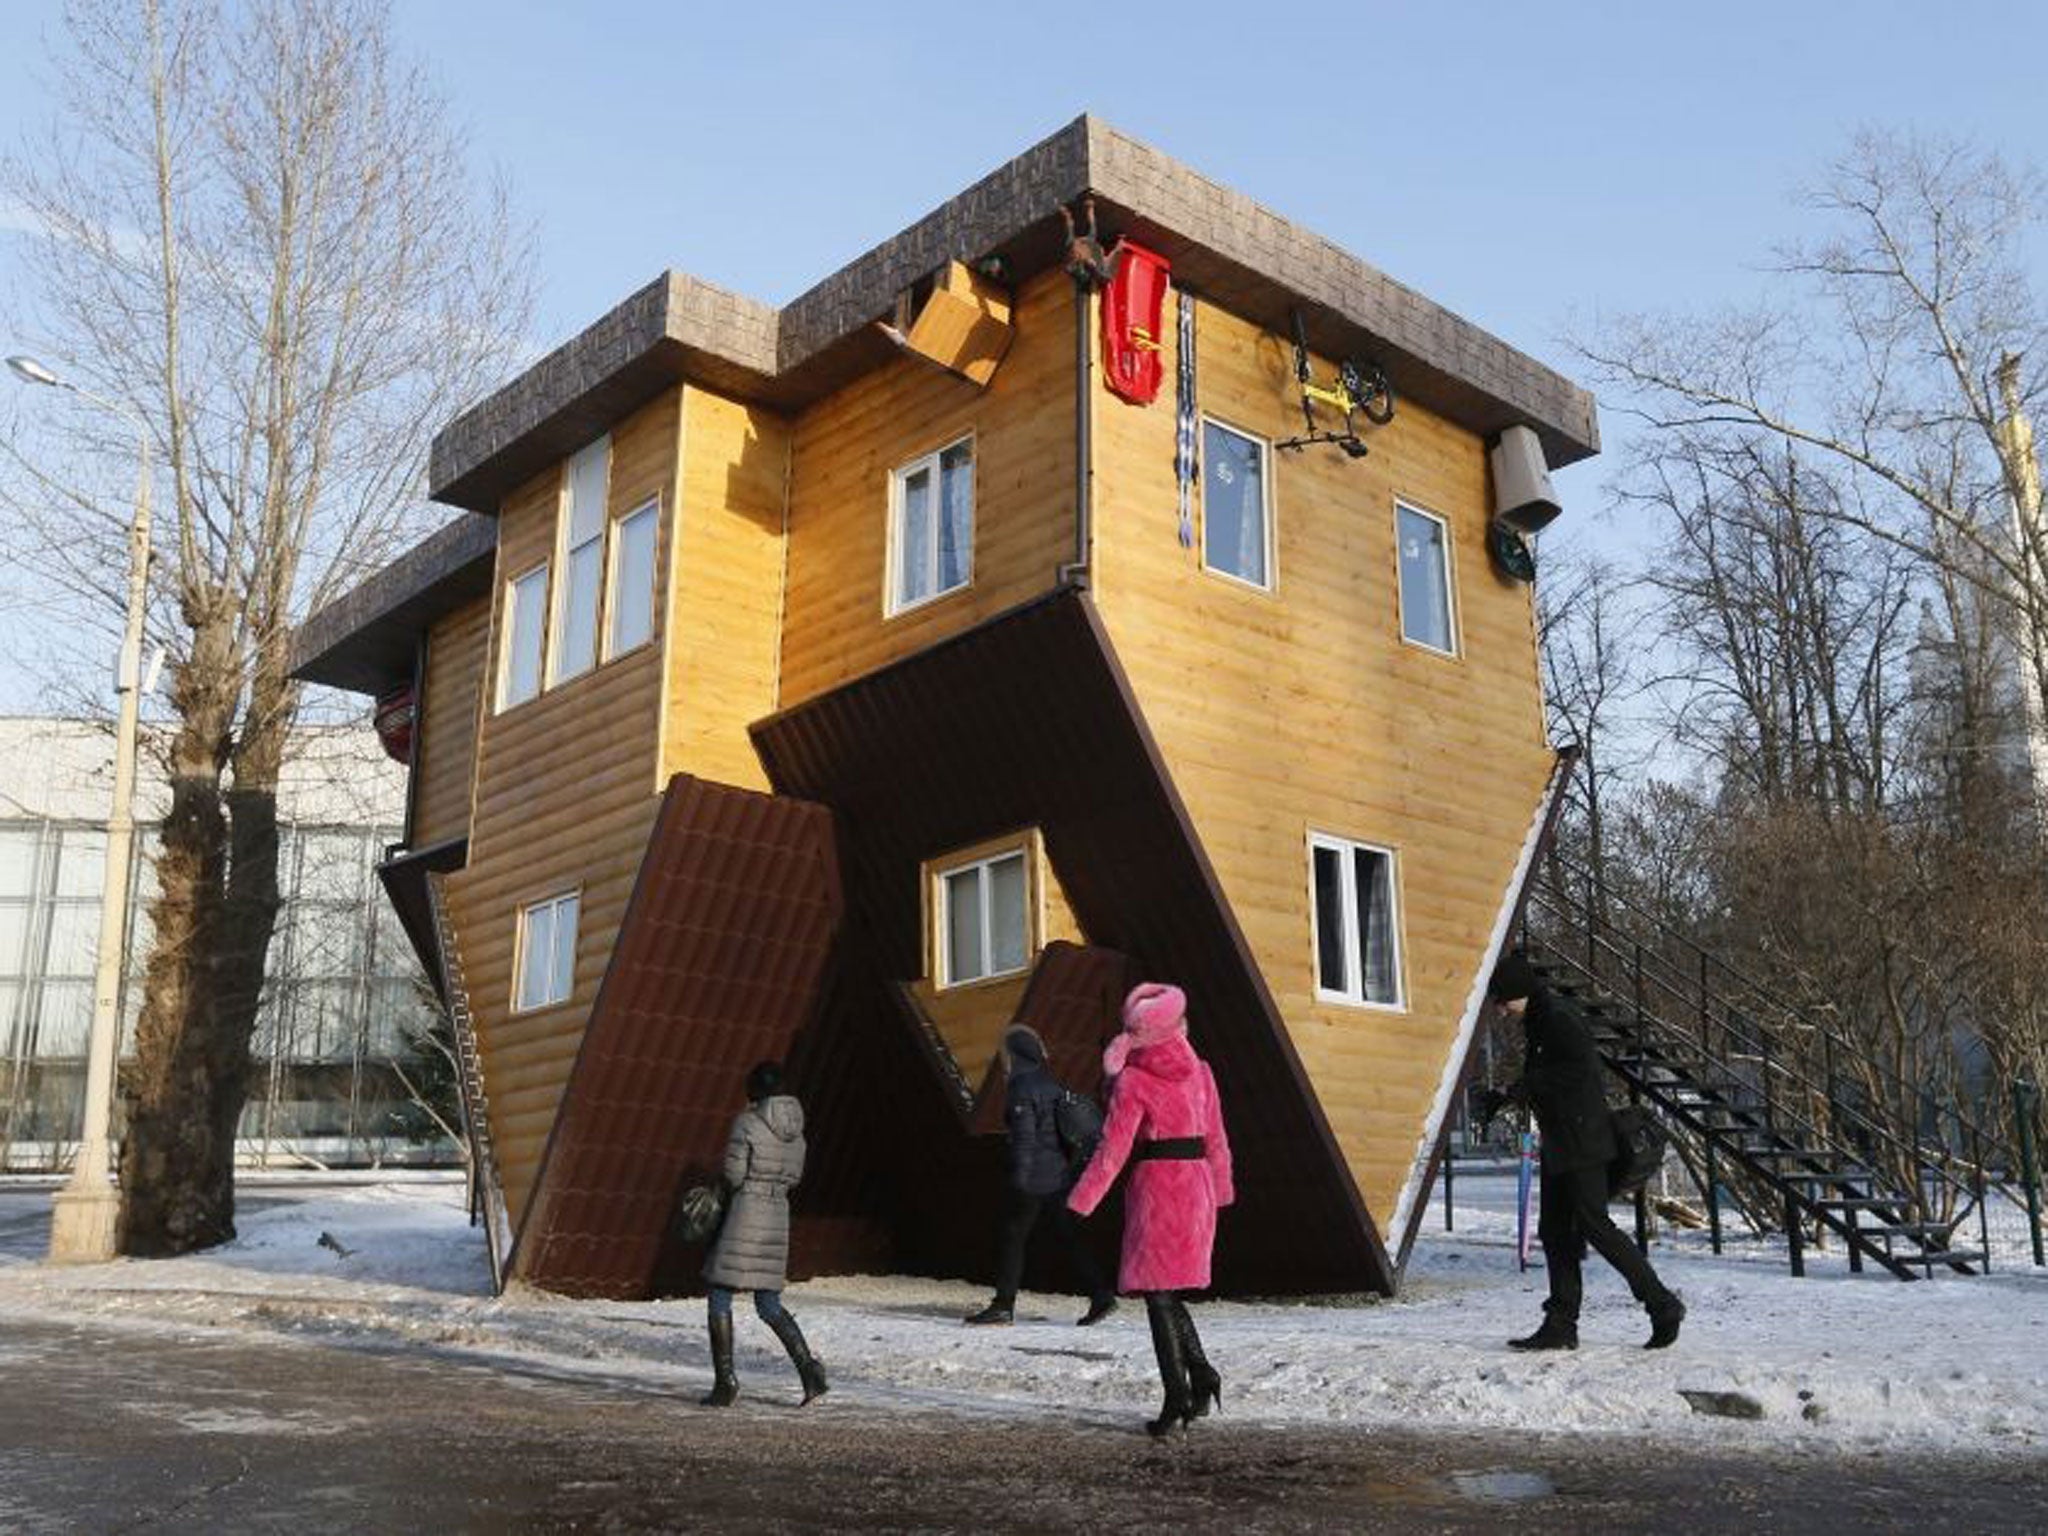 People look at an 'Upside Down House' attraction displayed at the VVTs the All-Russia Exhibition Center in Moscow